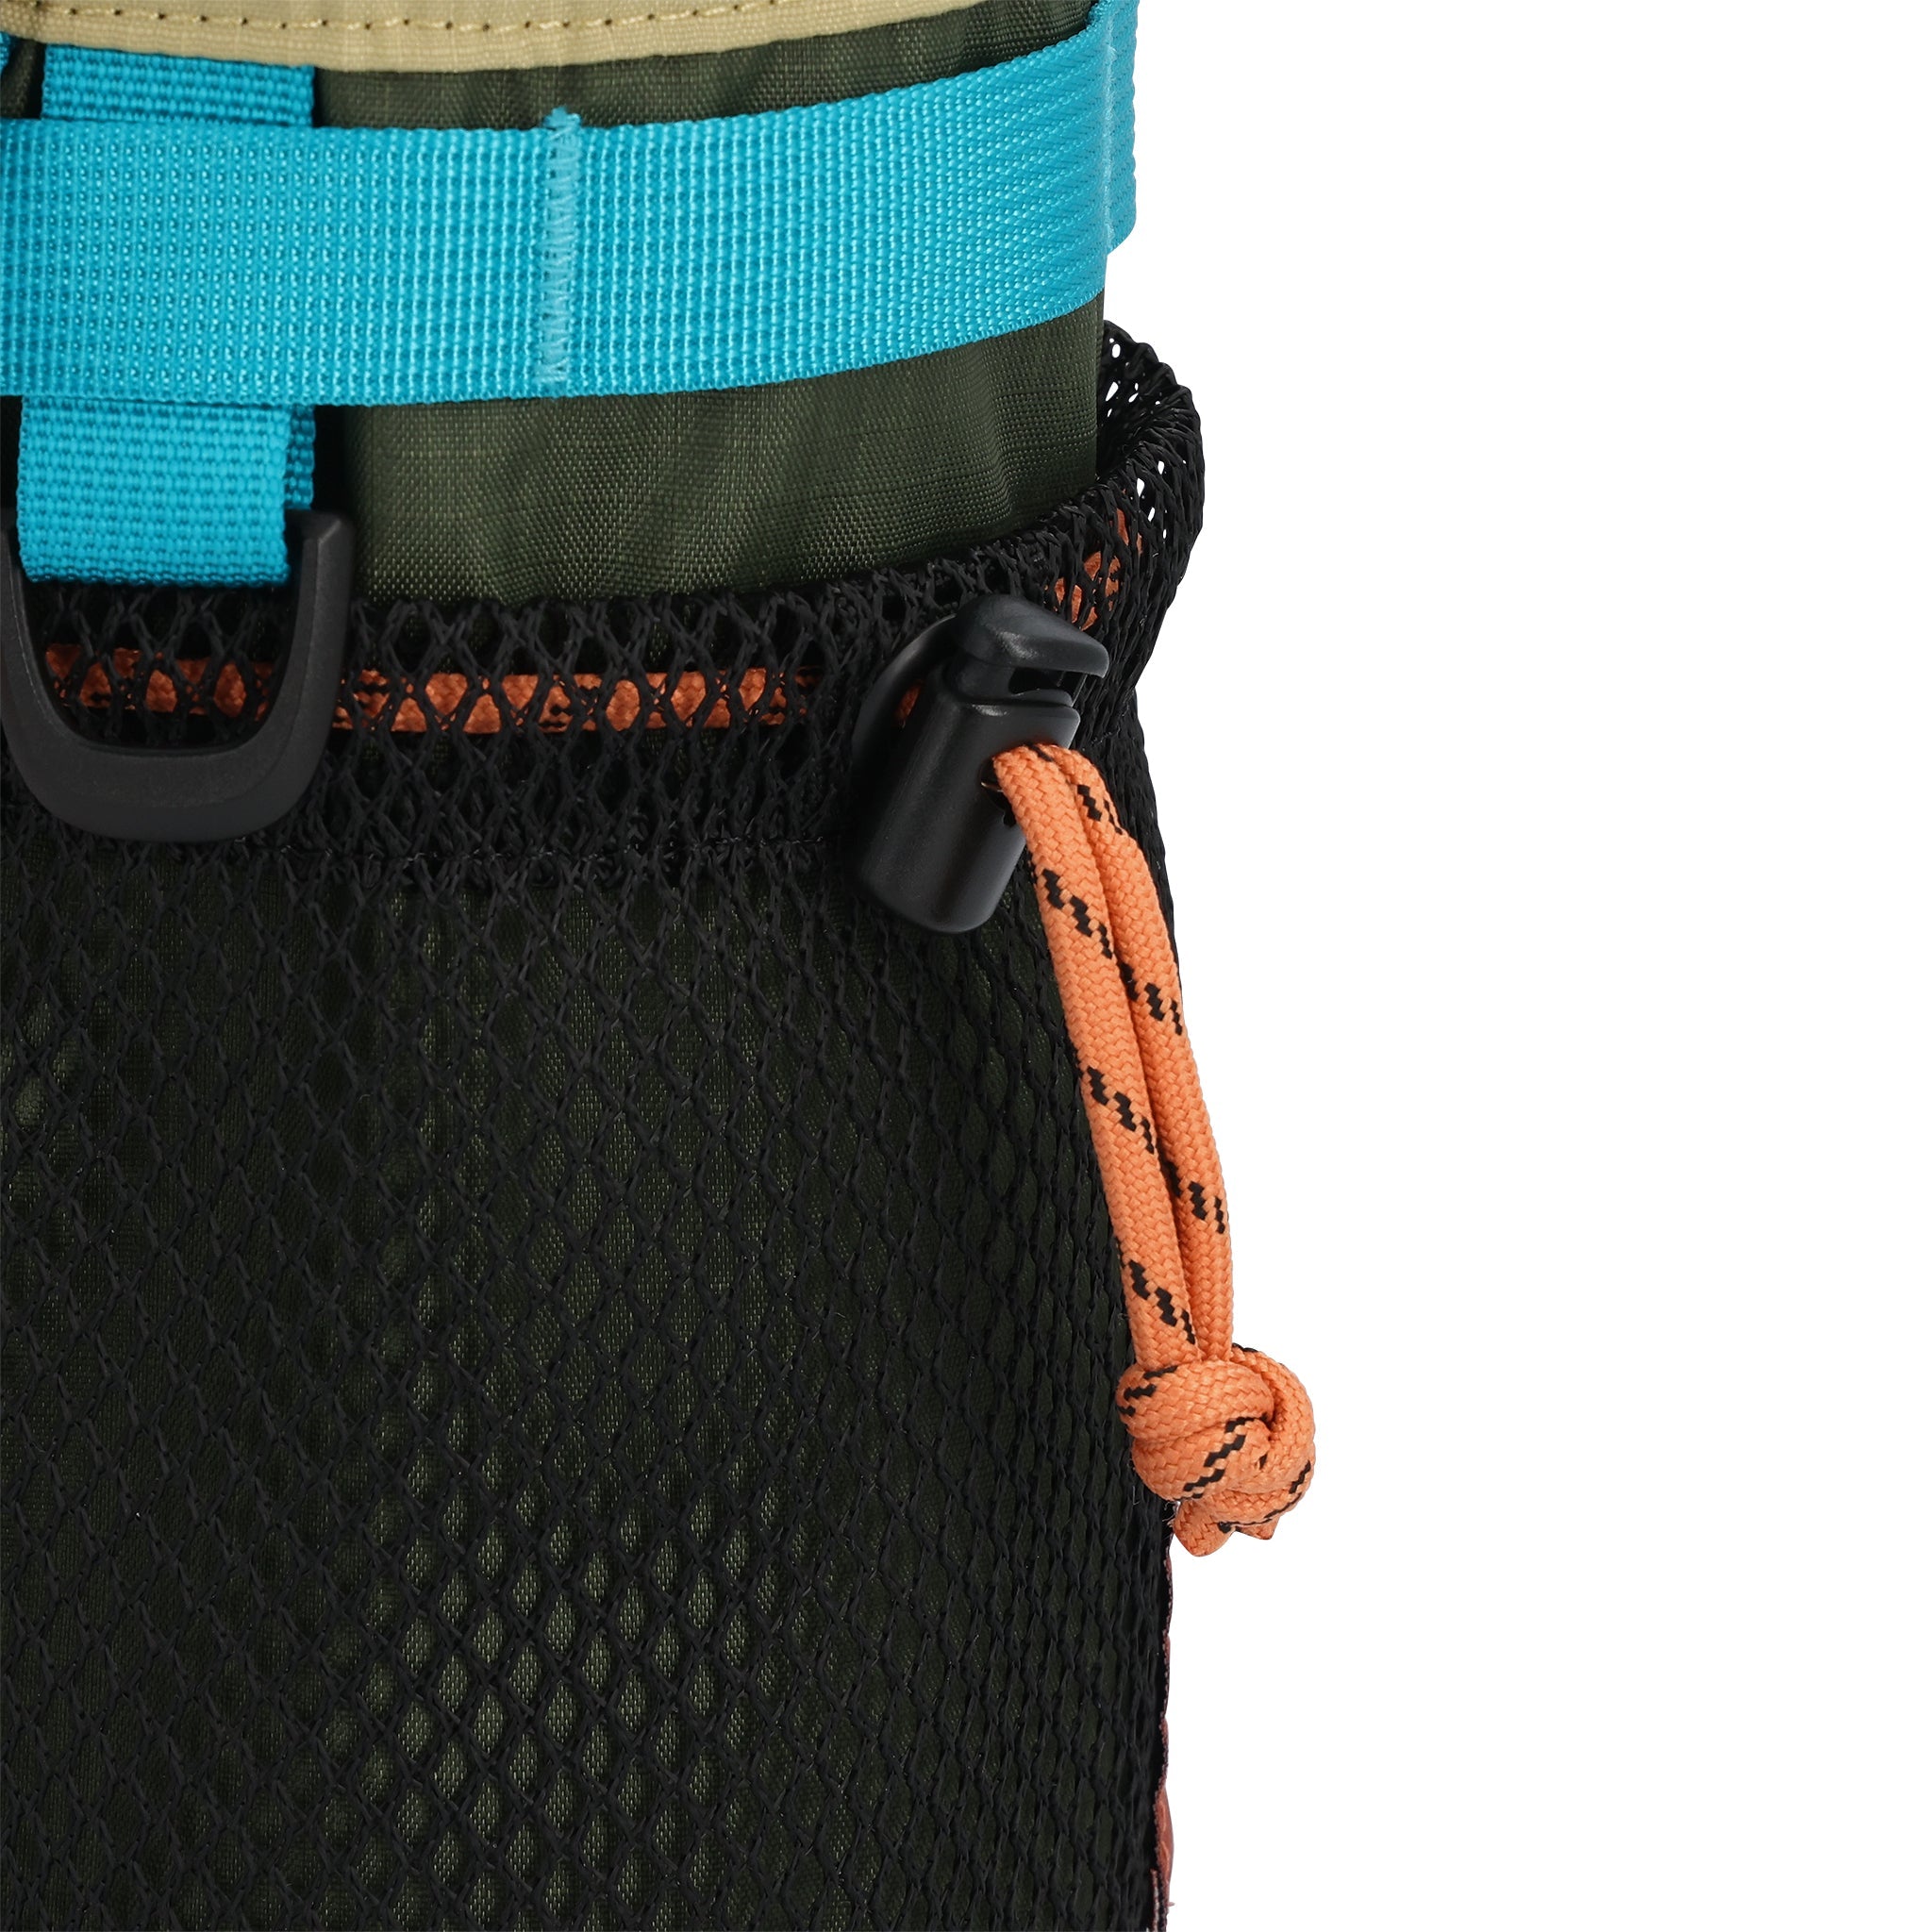 Detail shot of Topo Designs Mountain Hydro Sling in "Olive"